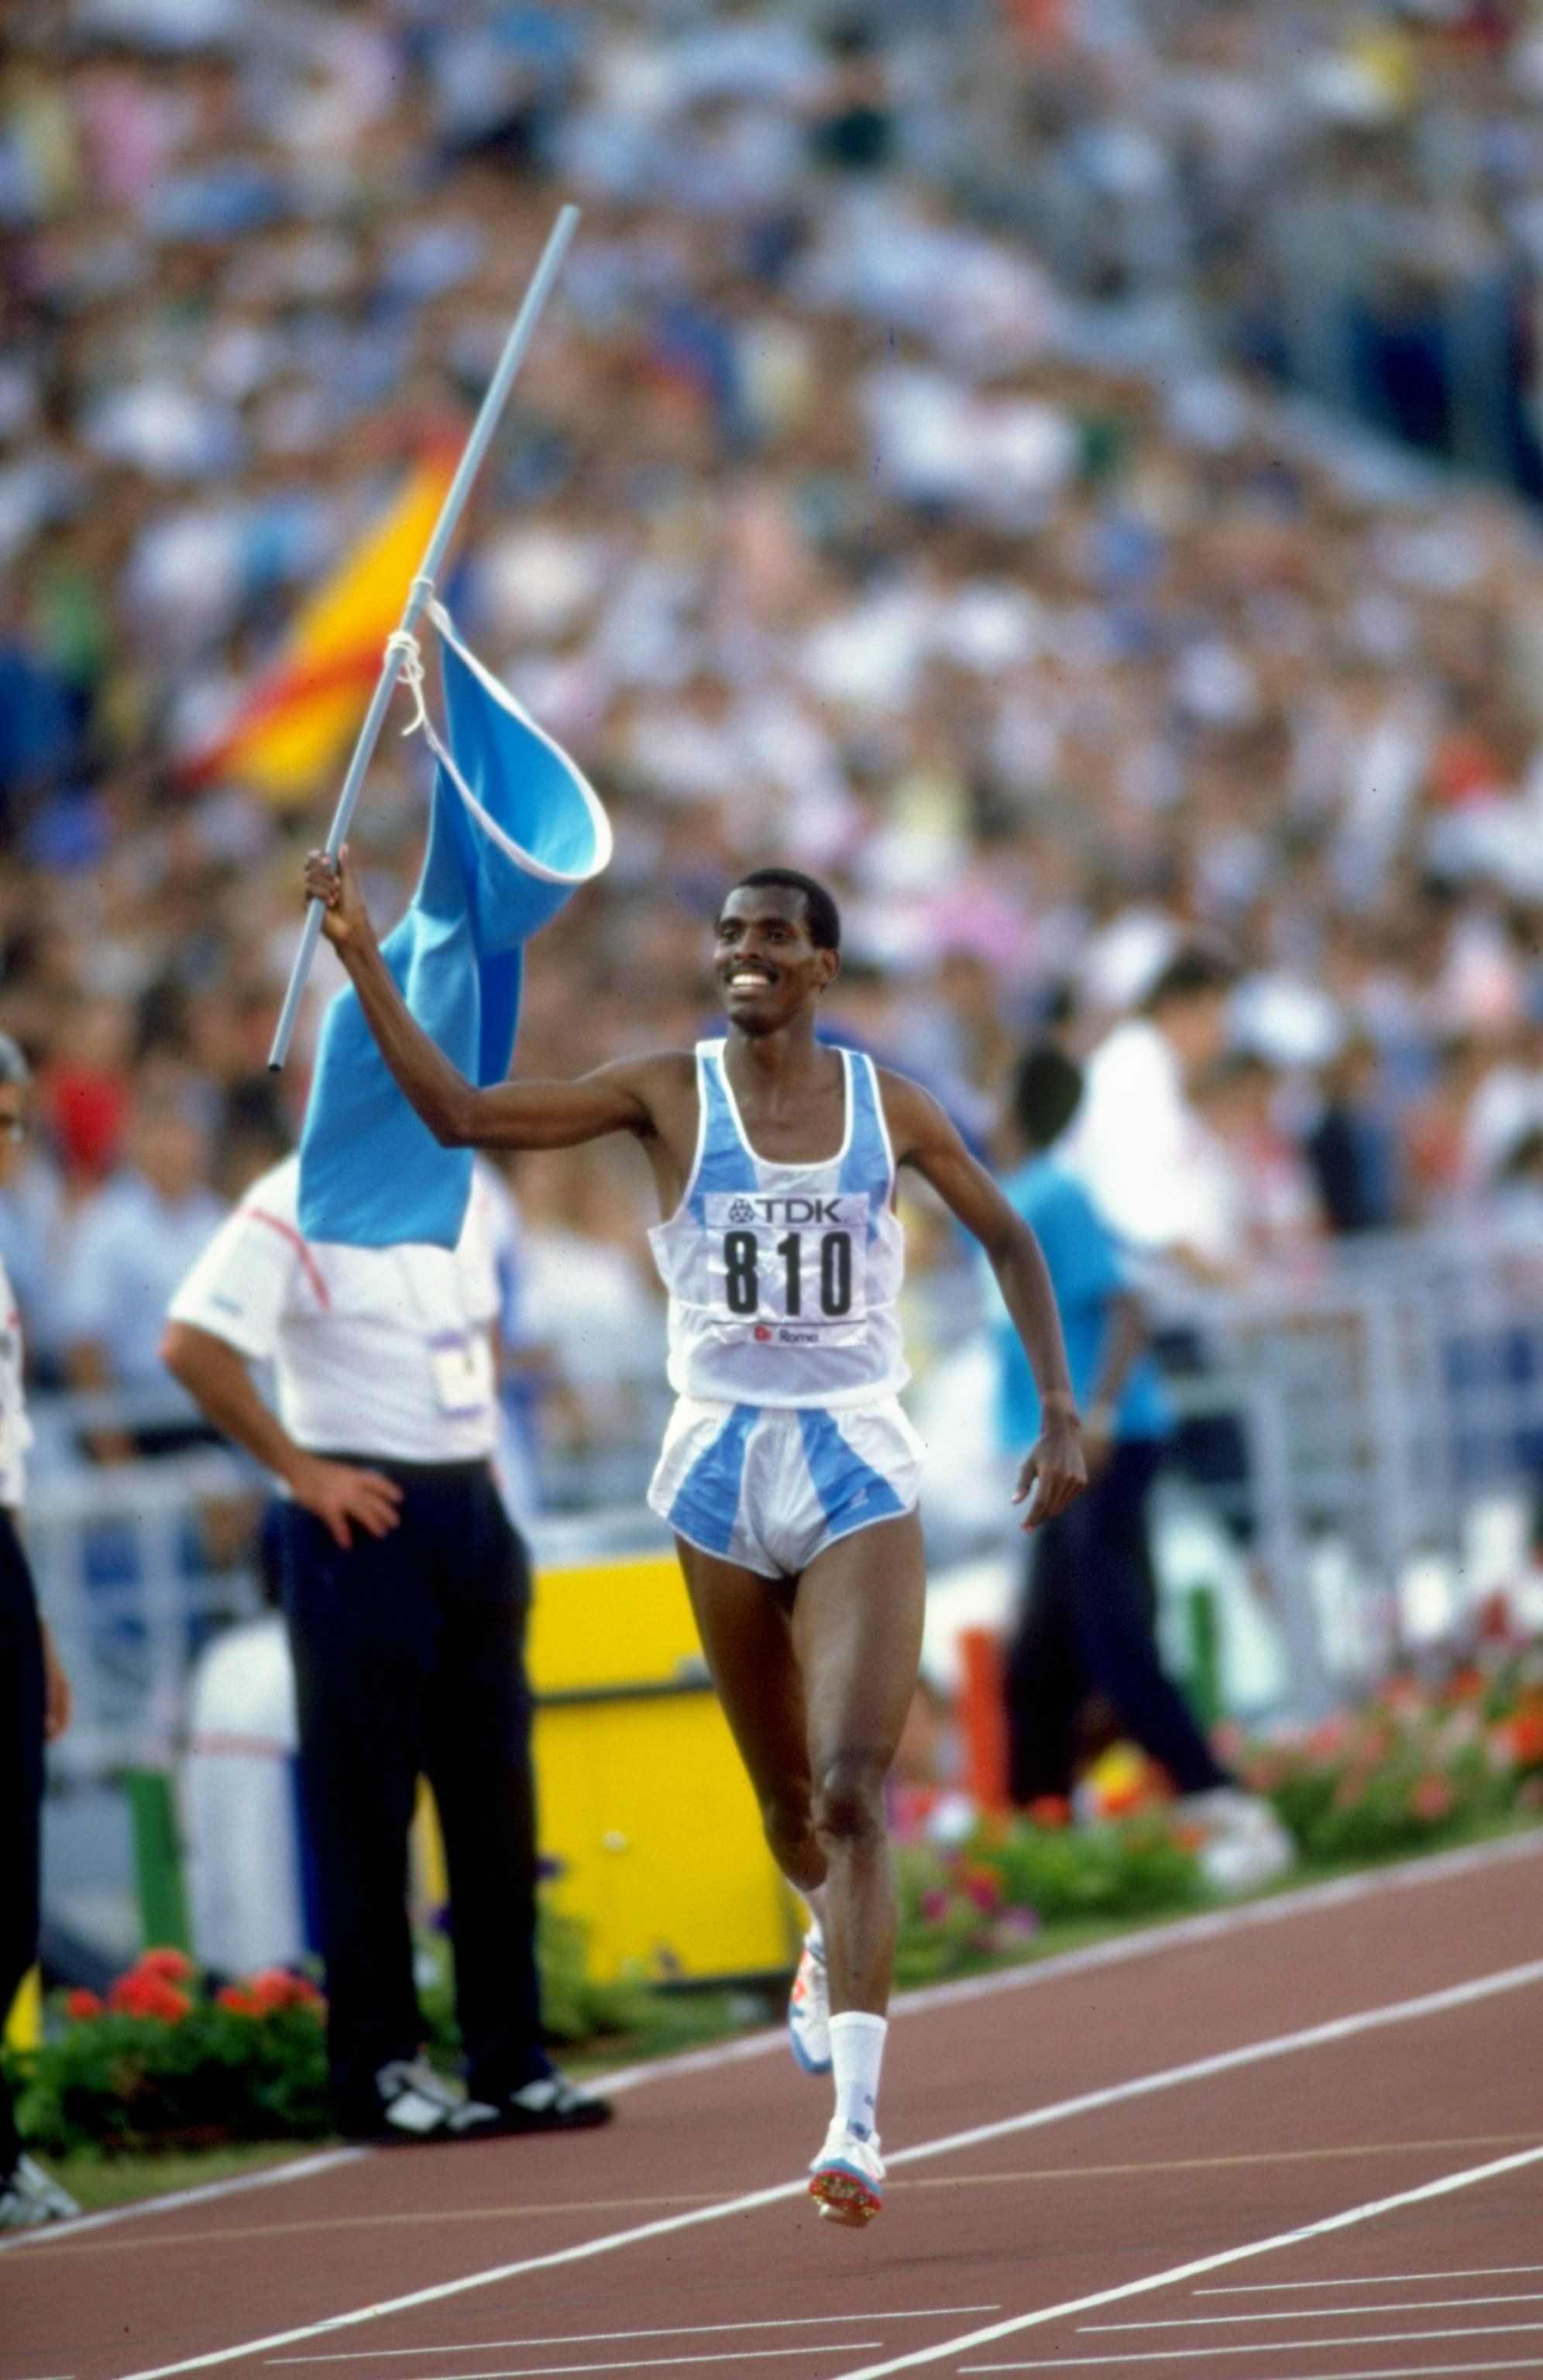 Abdi Bile celebrates after winning the 1500m at the 1987 World Championships in Rome